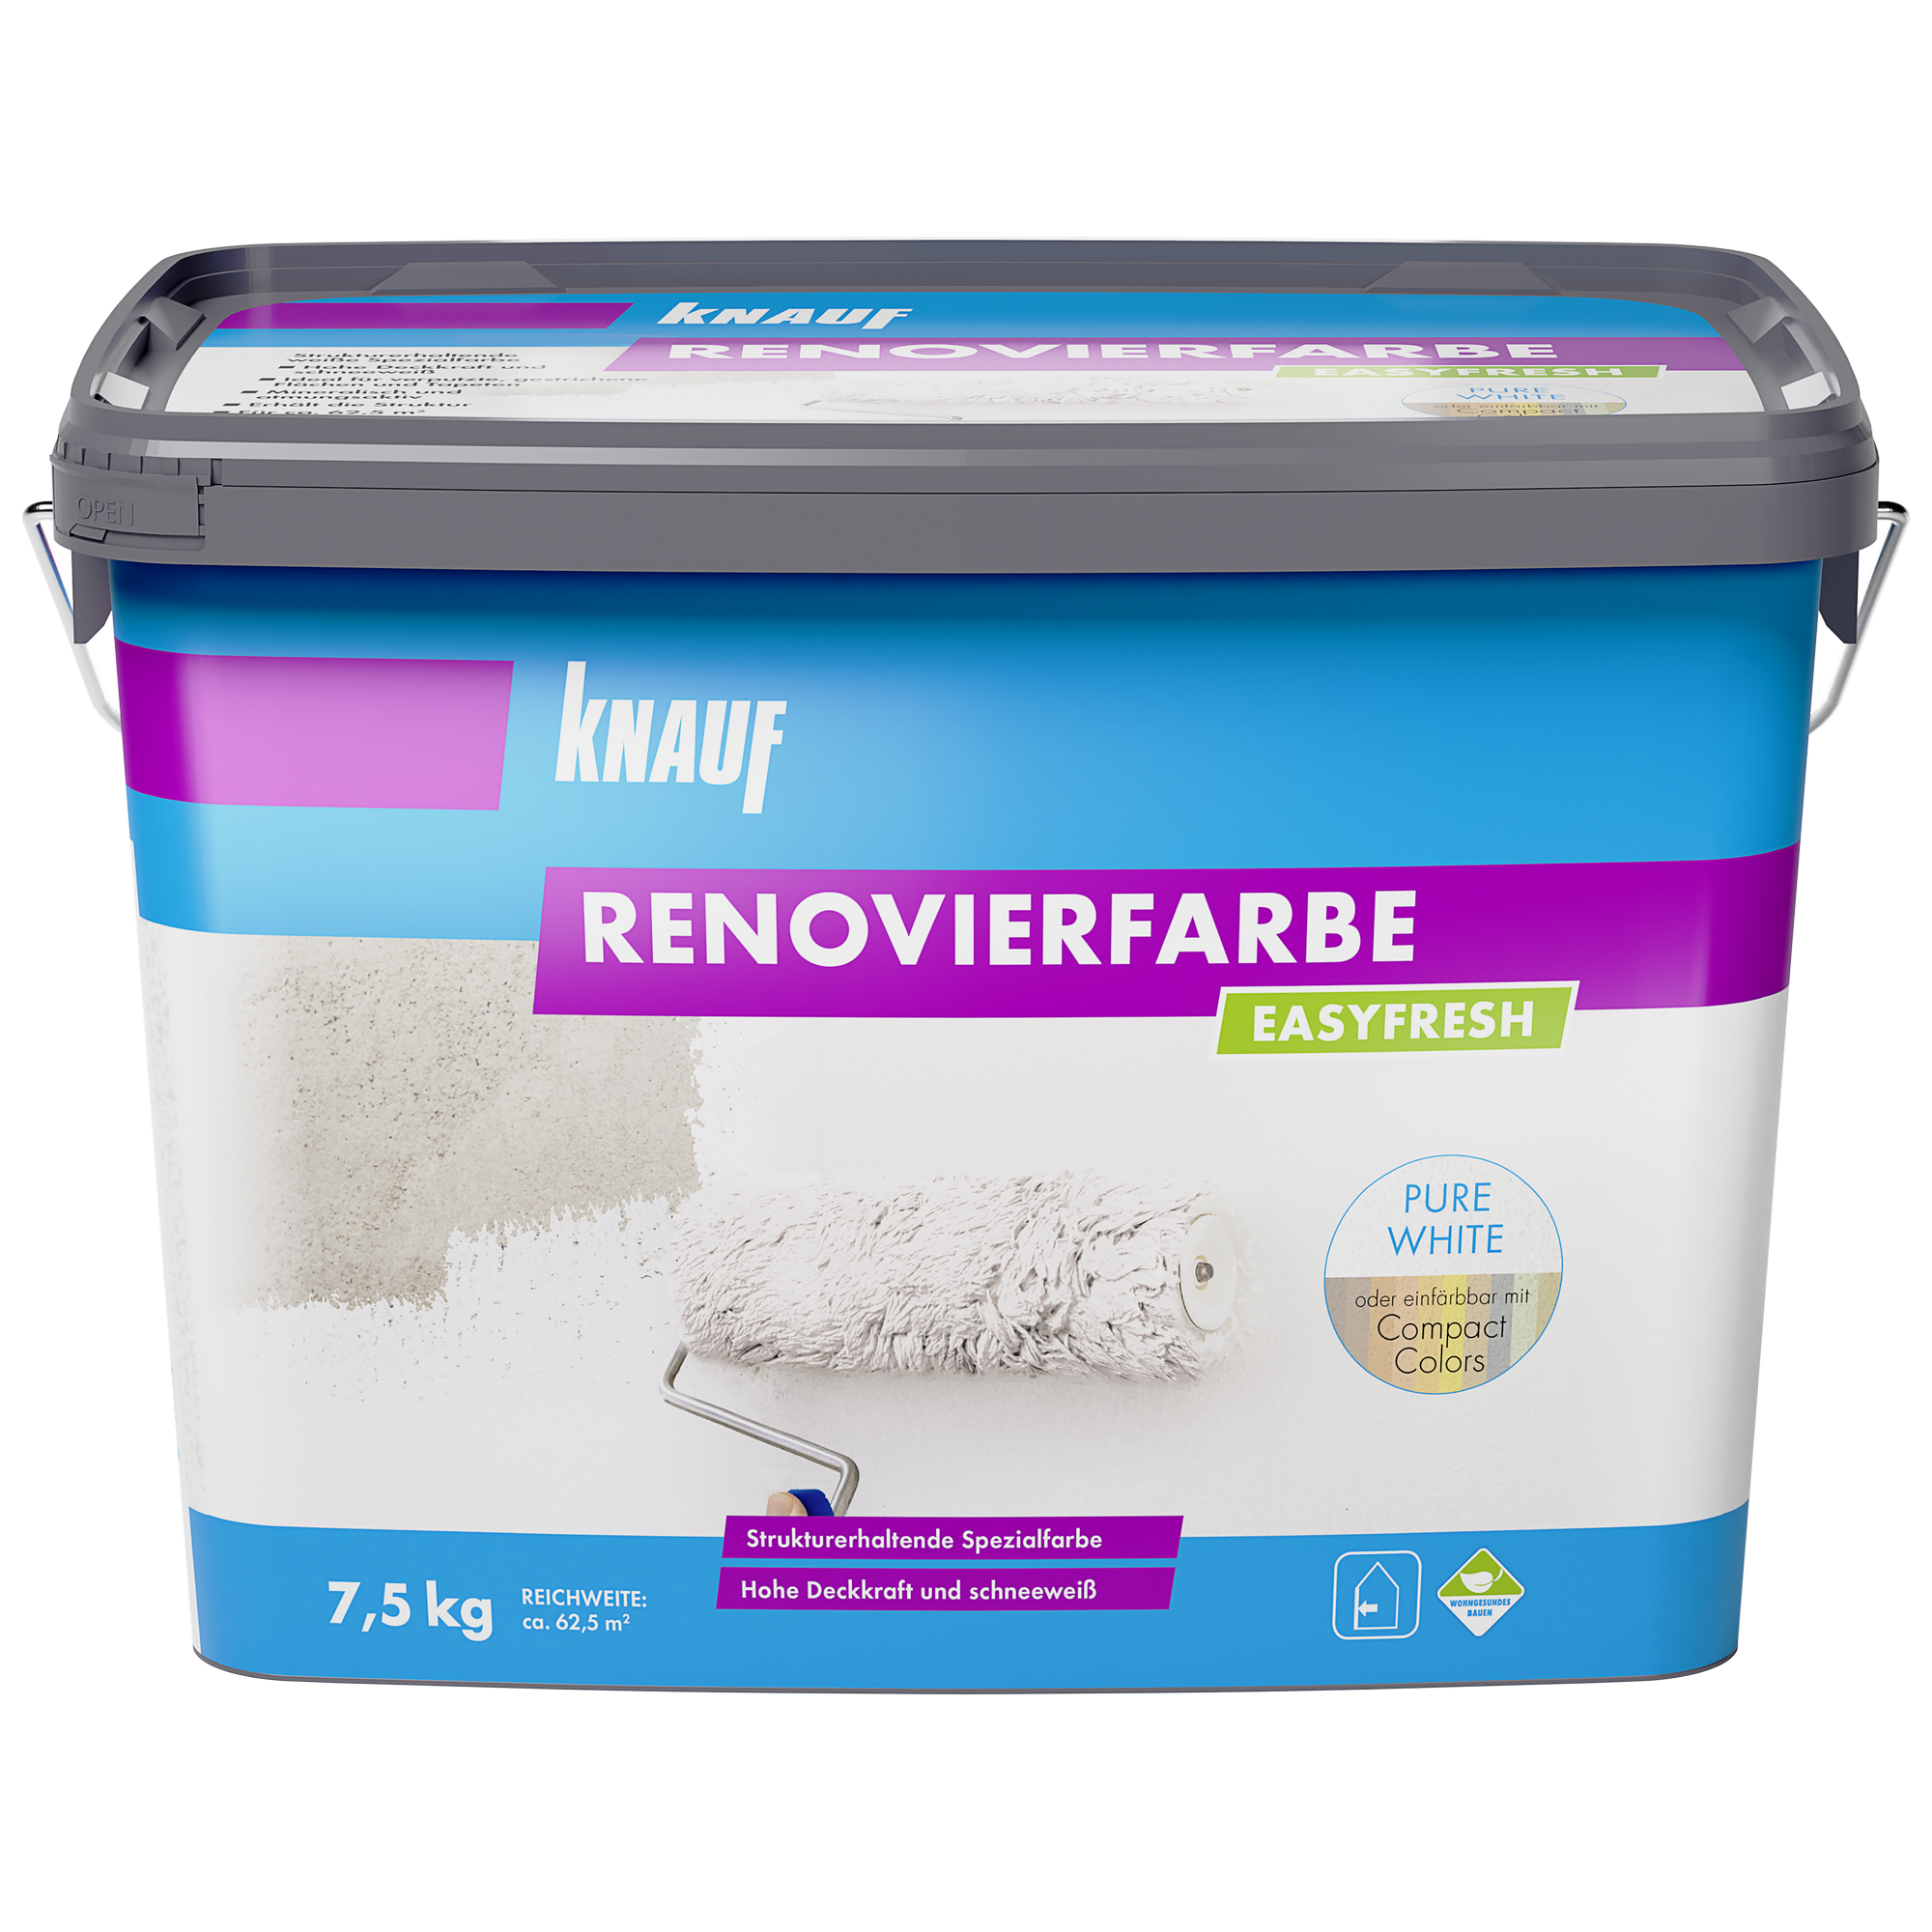 Renovierfarbe 'Easyfresh' 7,5 kg + product picture